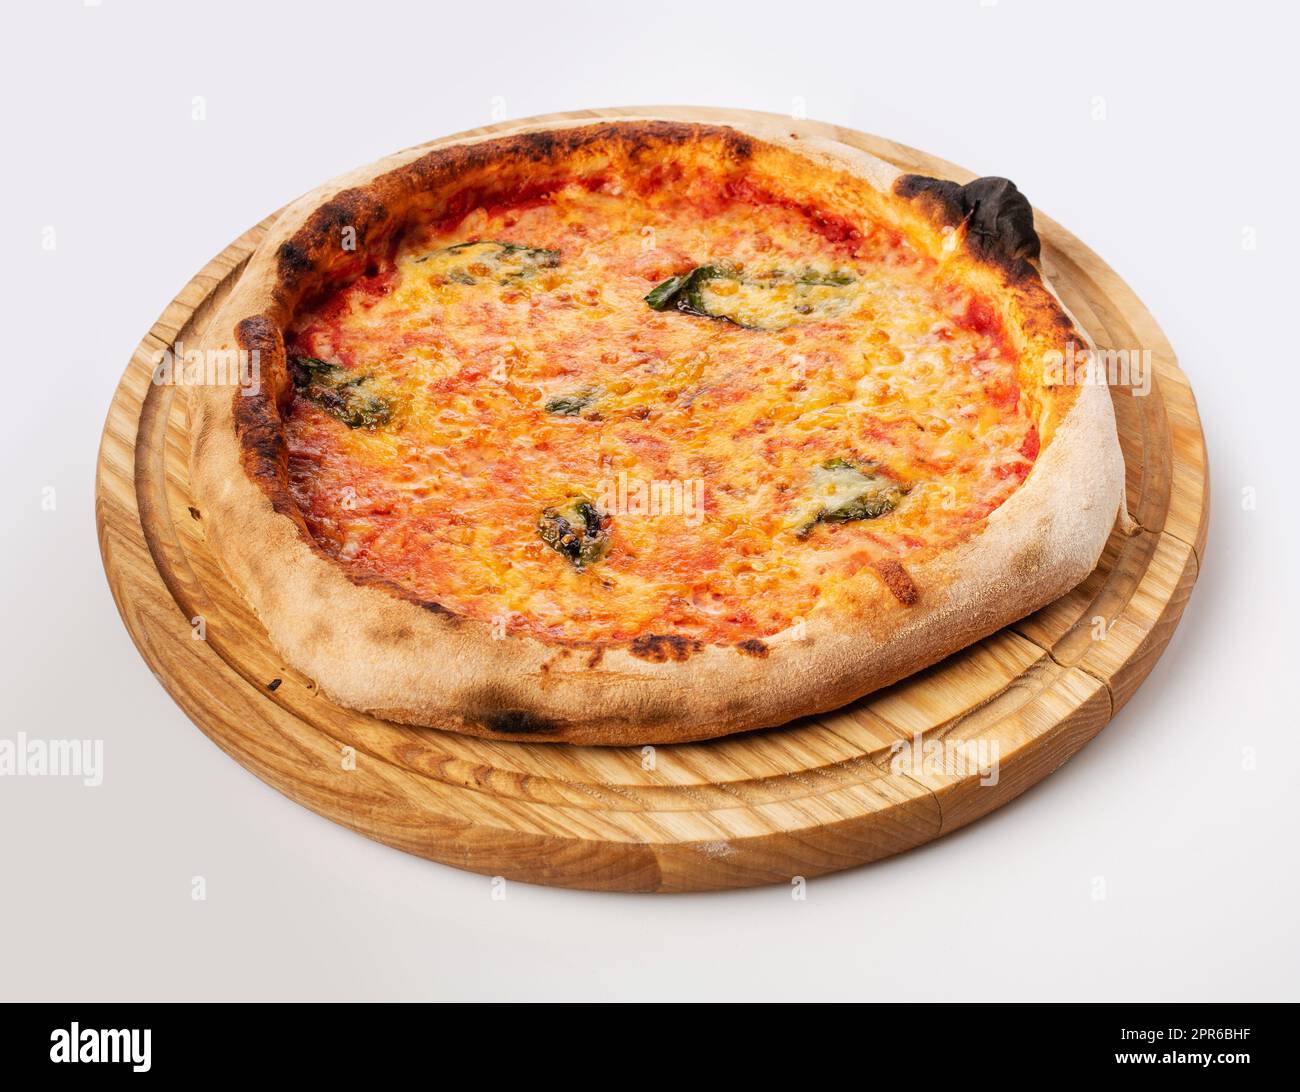 Top view of hot pizza on a wooden stand. Stock Photo